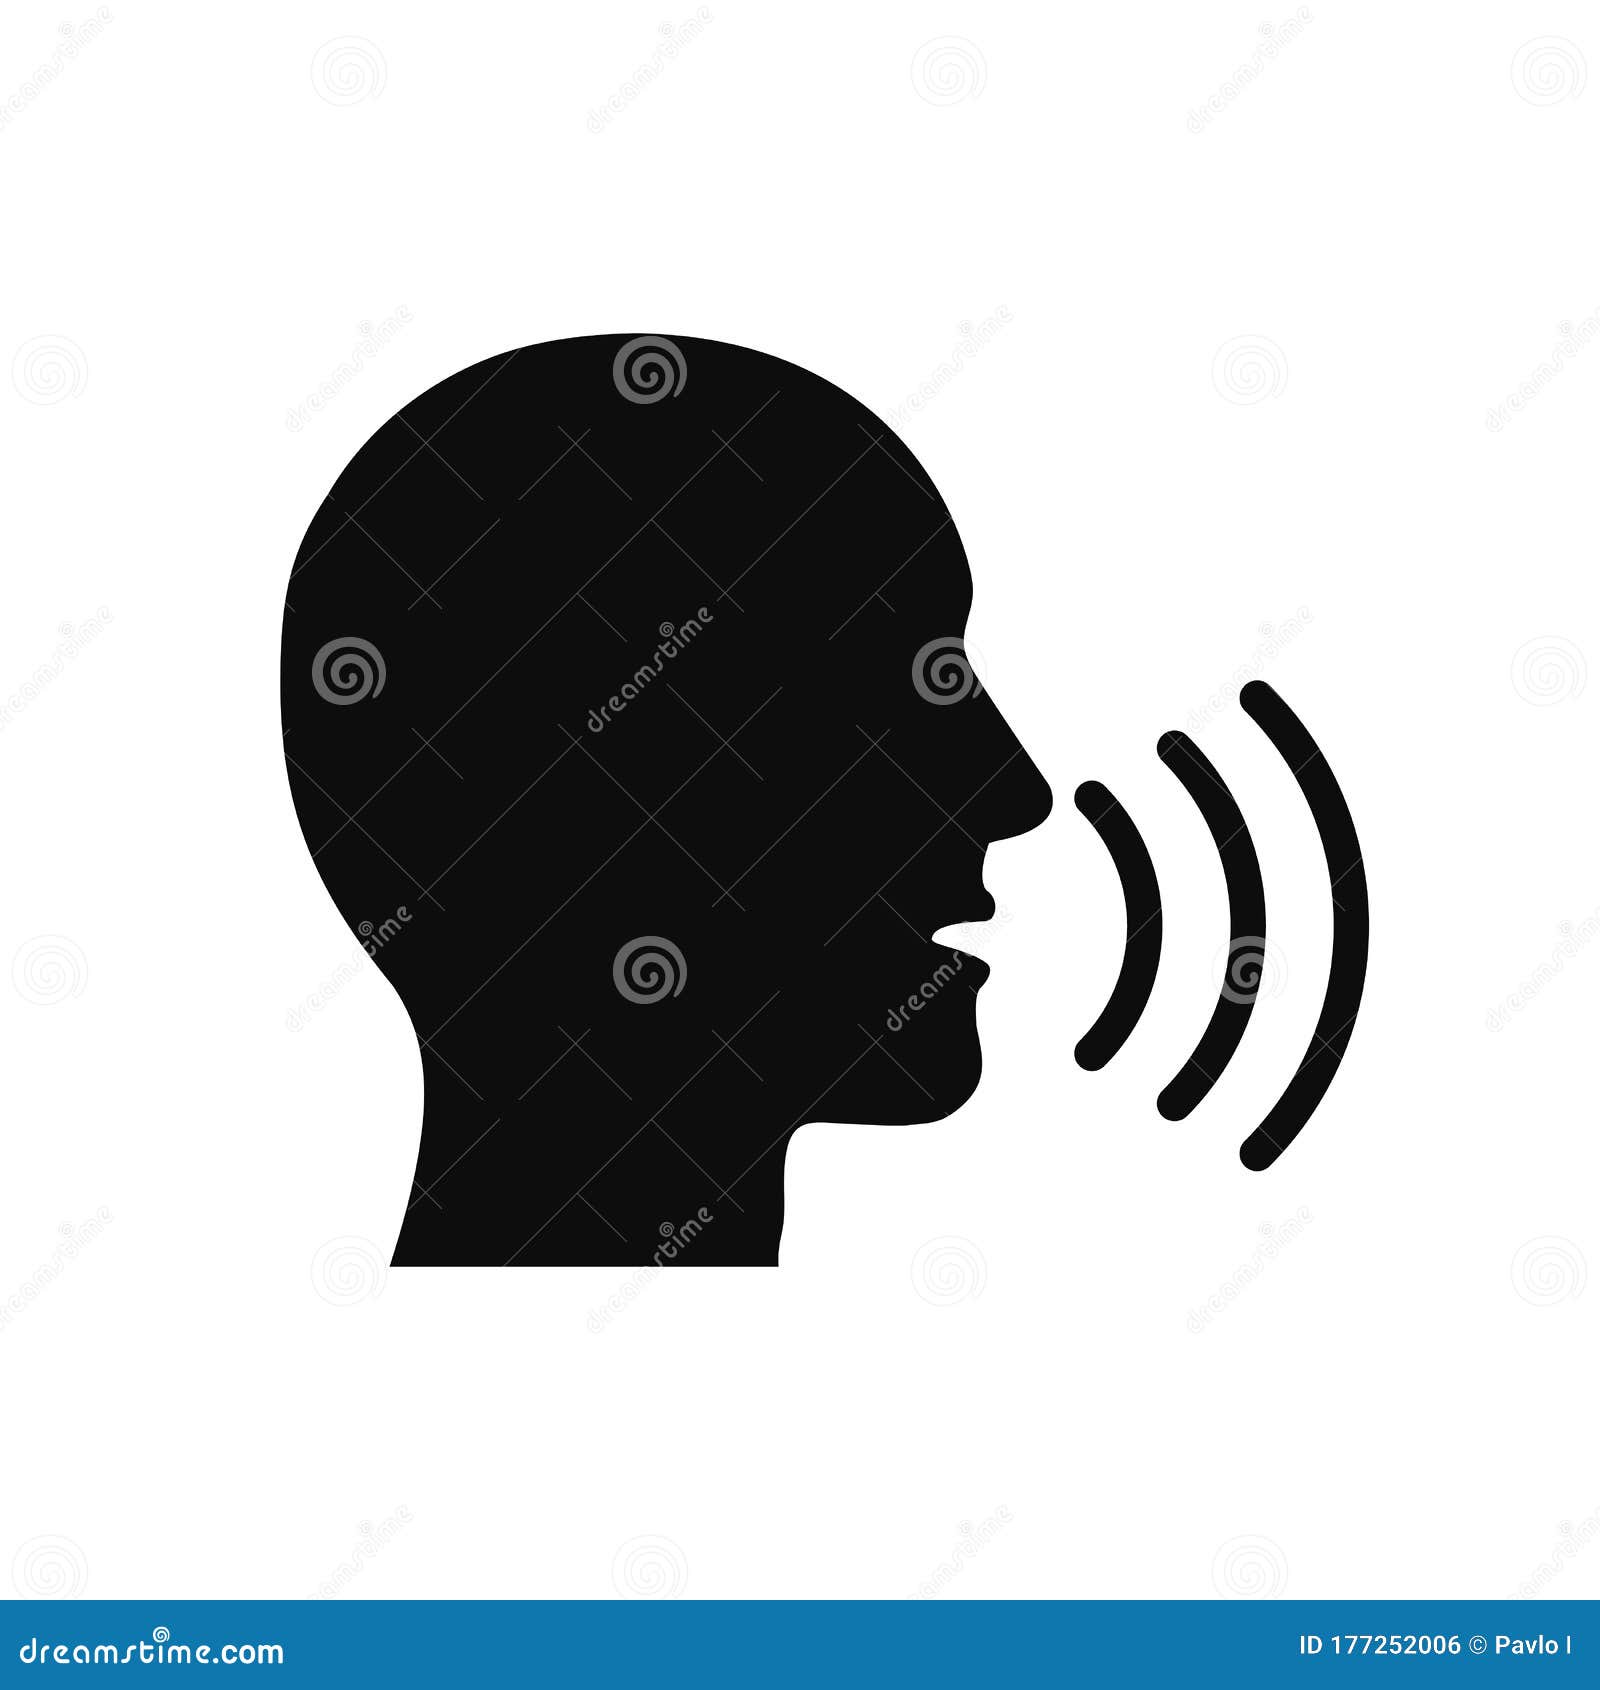 speak icon, talk or talking person sign, speech icon for interview, interact and talks controls, man with open mouth Ã¢â¬â stock